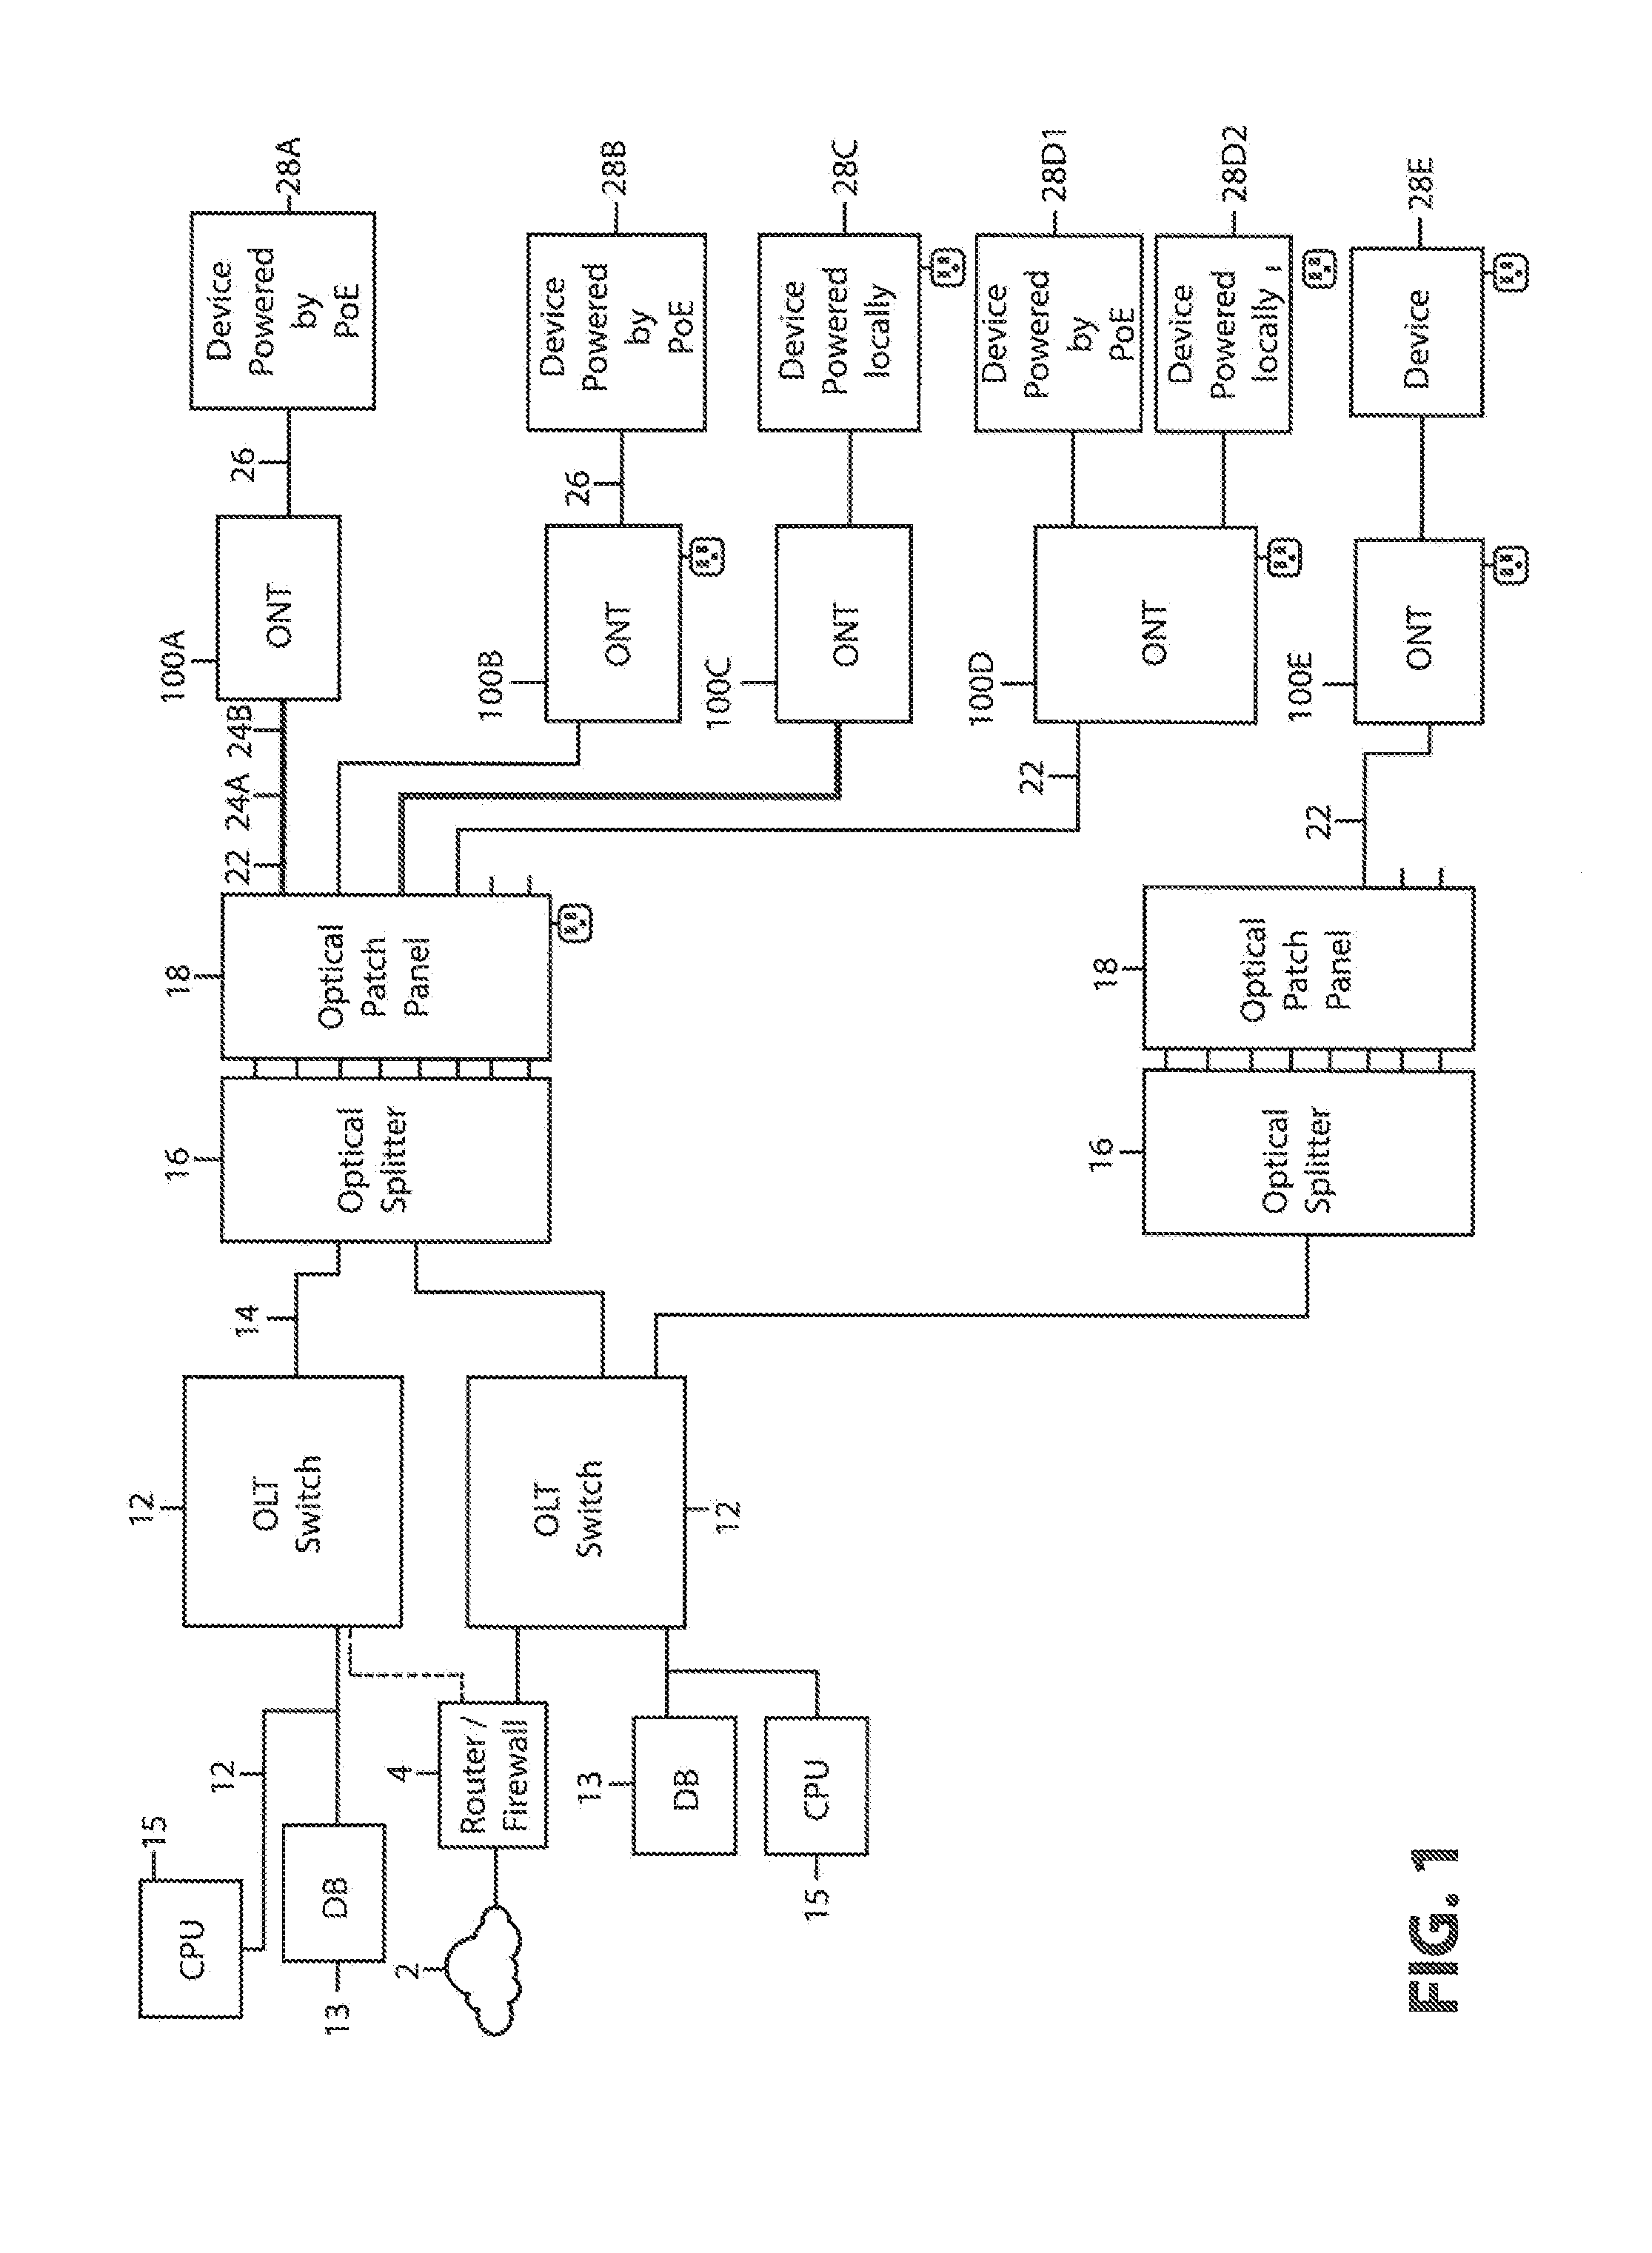 Method and system for using persistent identifiers in passive optical networking